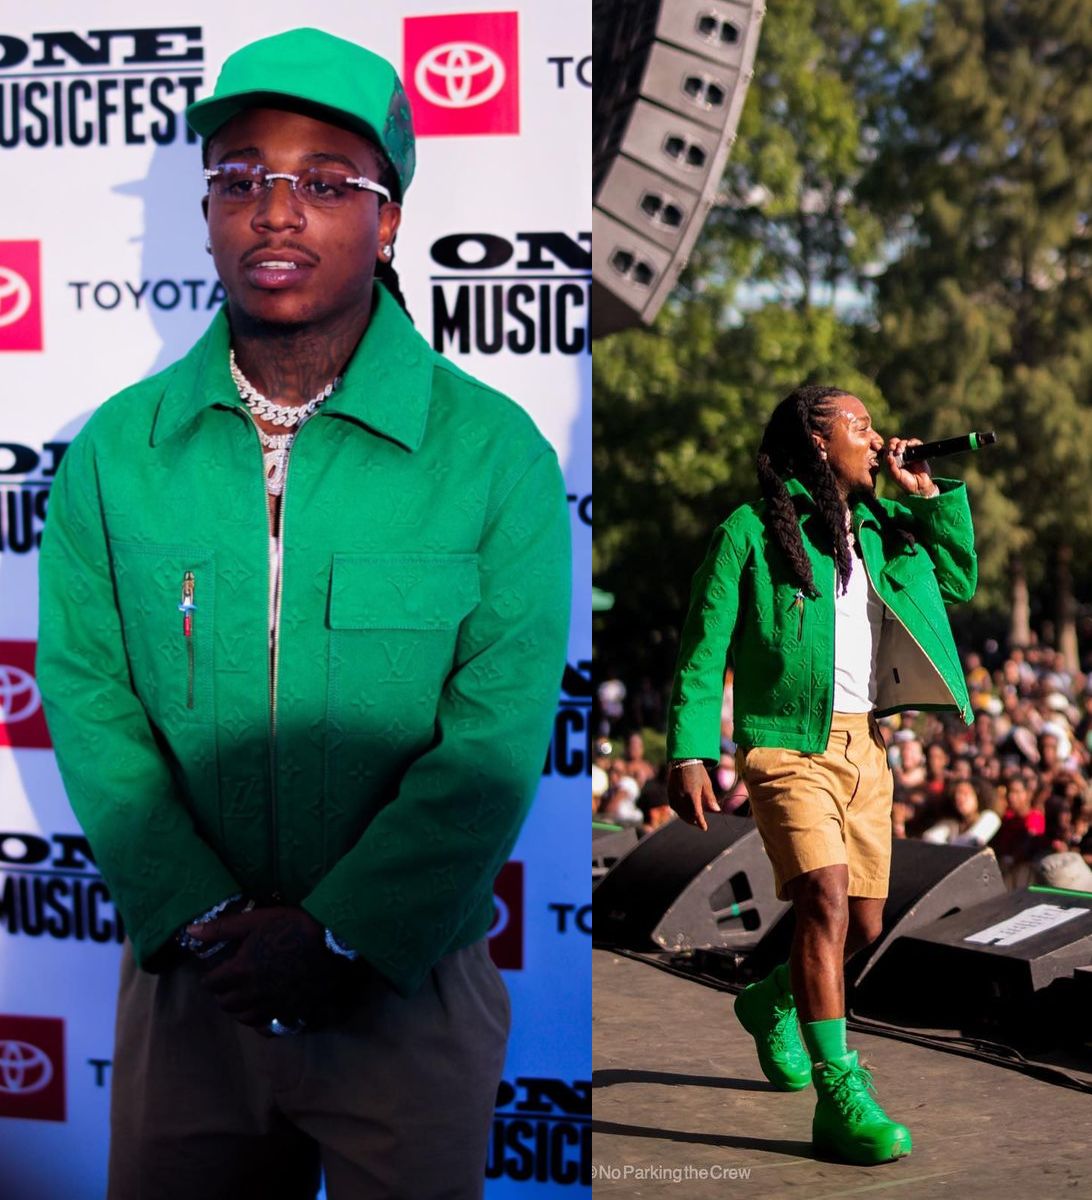 Jacquees Performing at ONE MusicFest In an All Green Louis Vuitton & Bottega Veneta Outfit